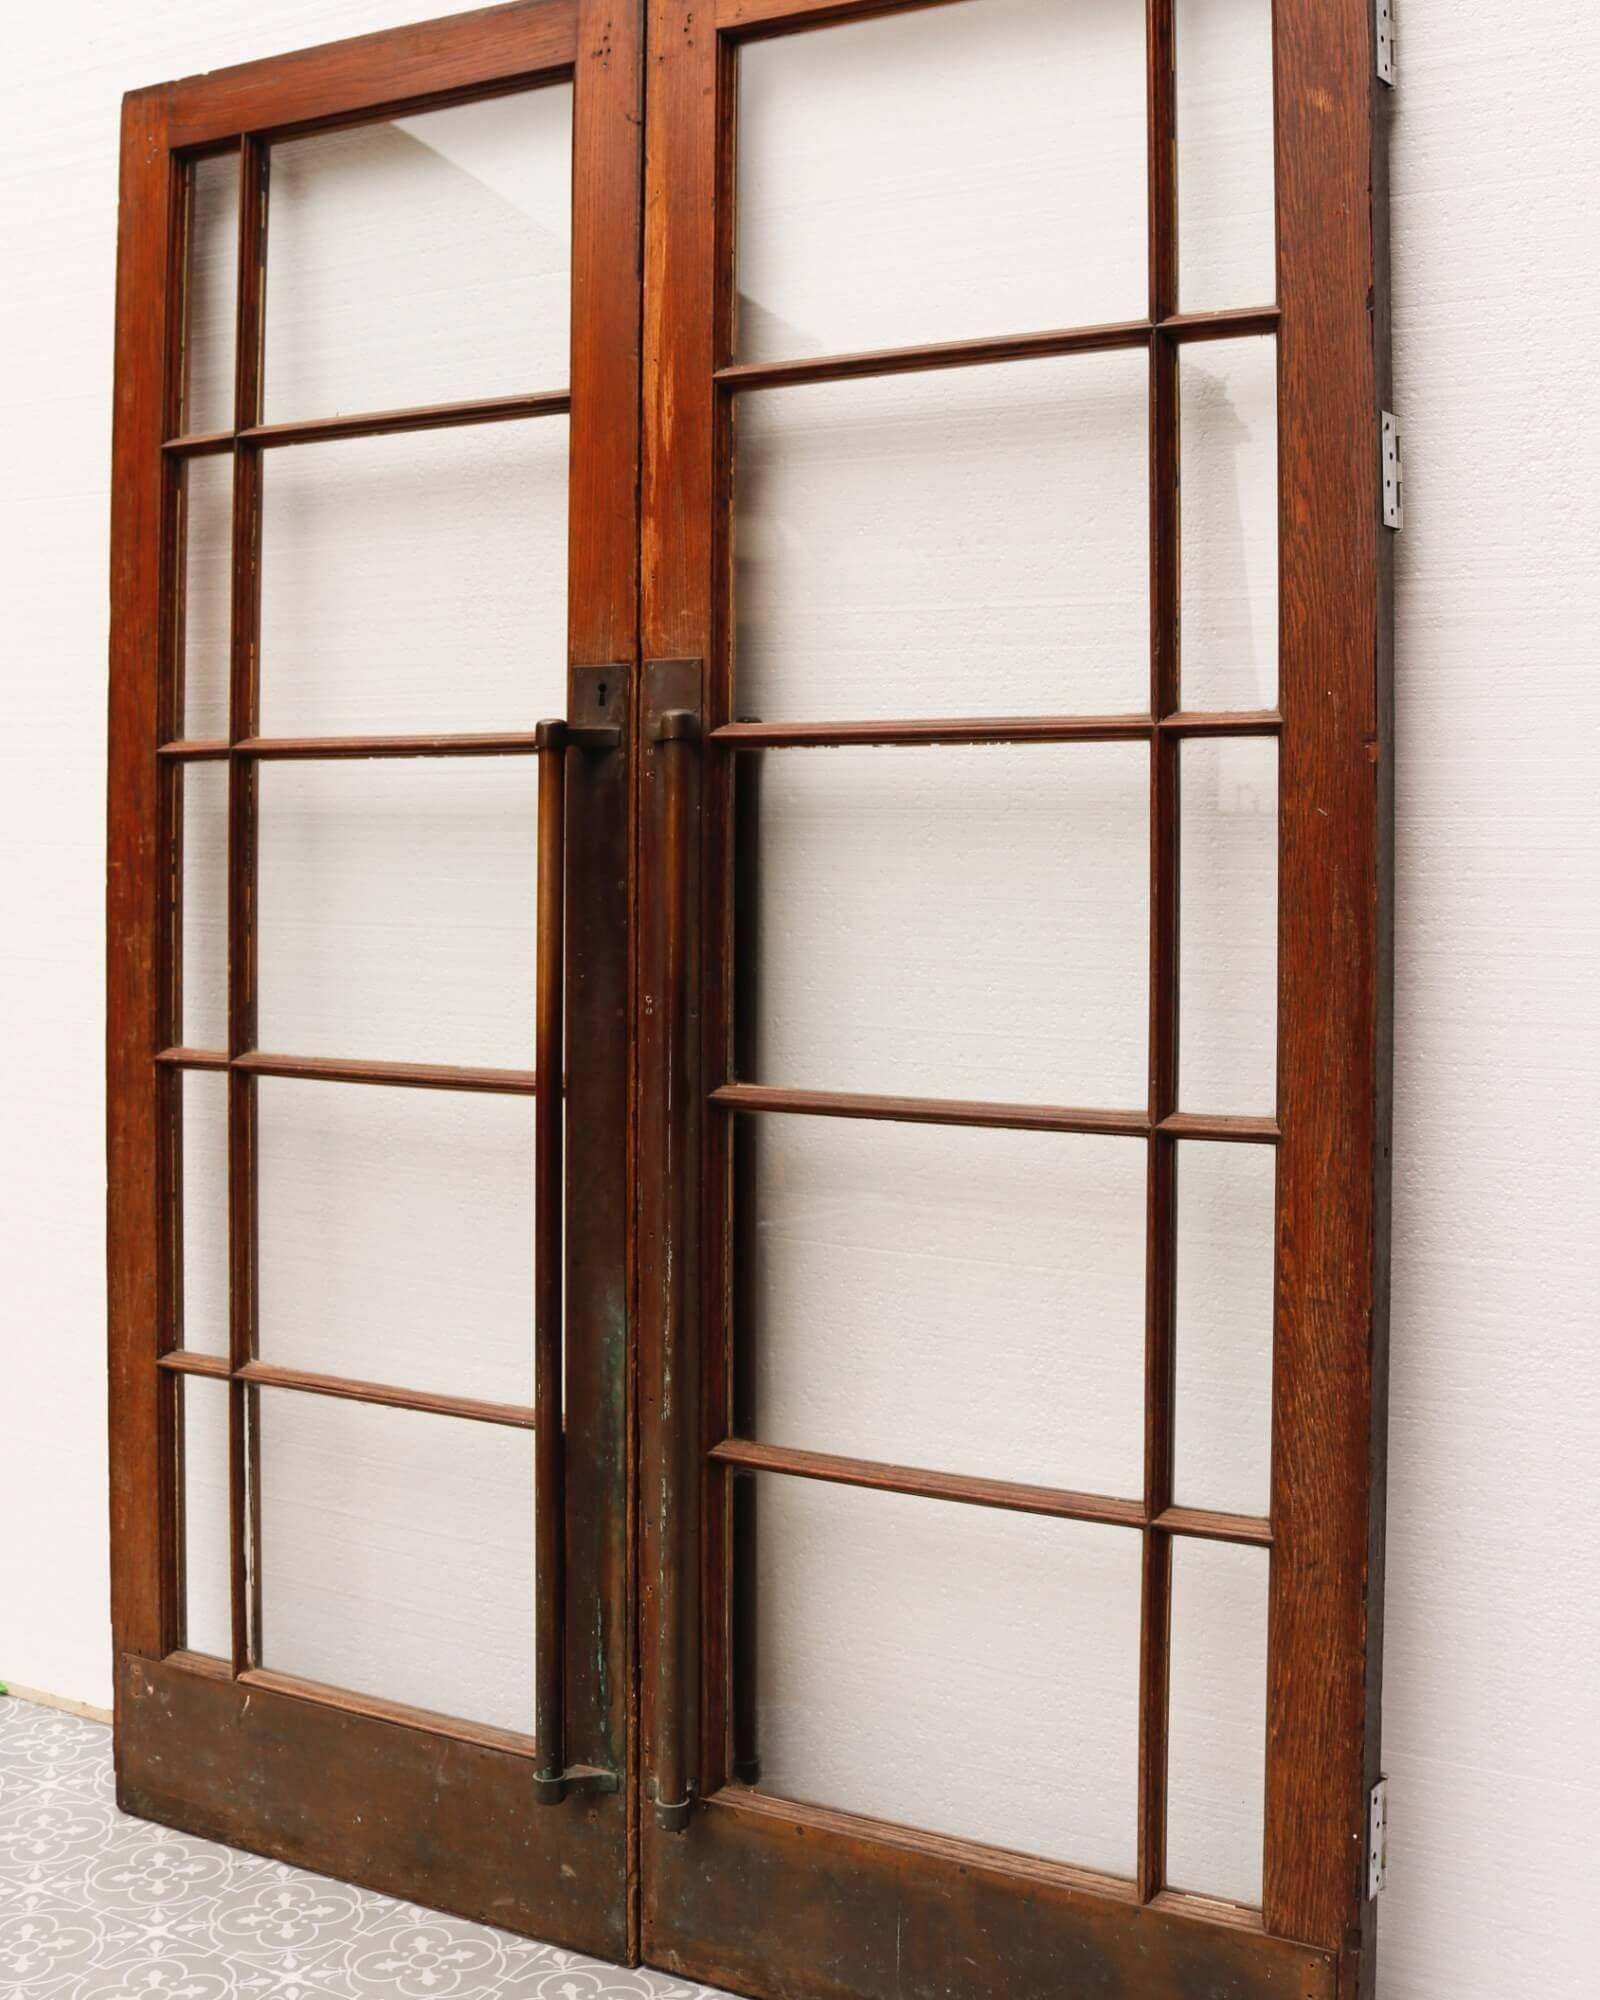 Pair of Oak Art Deco Interior Glazed Doors In Fair Condition For Sale In Wormelow, Herefordshire